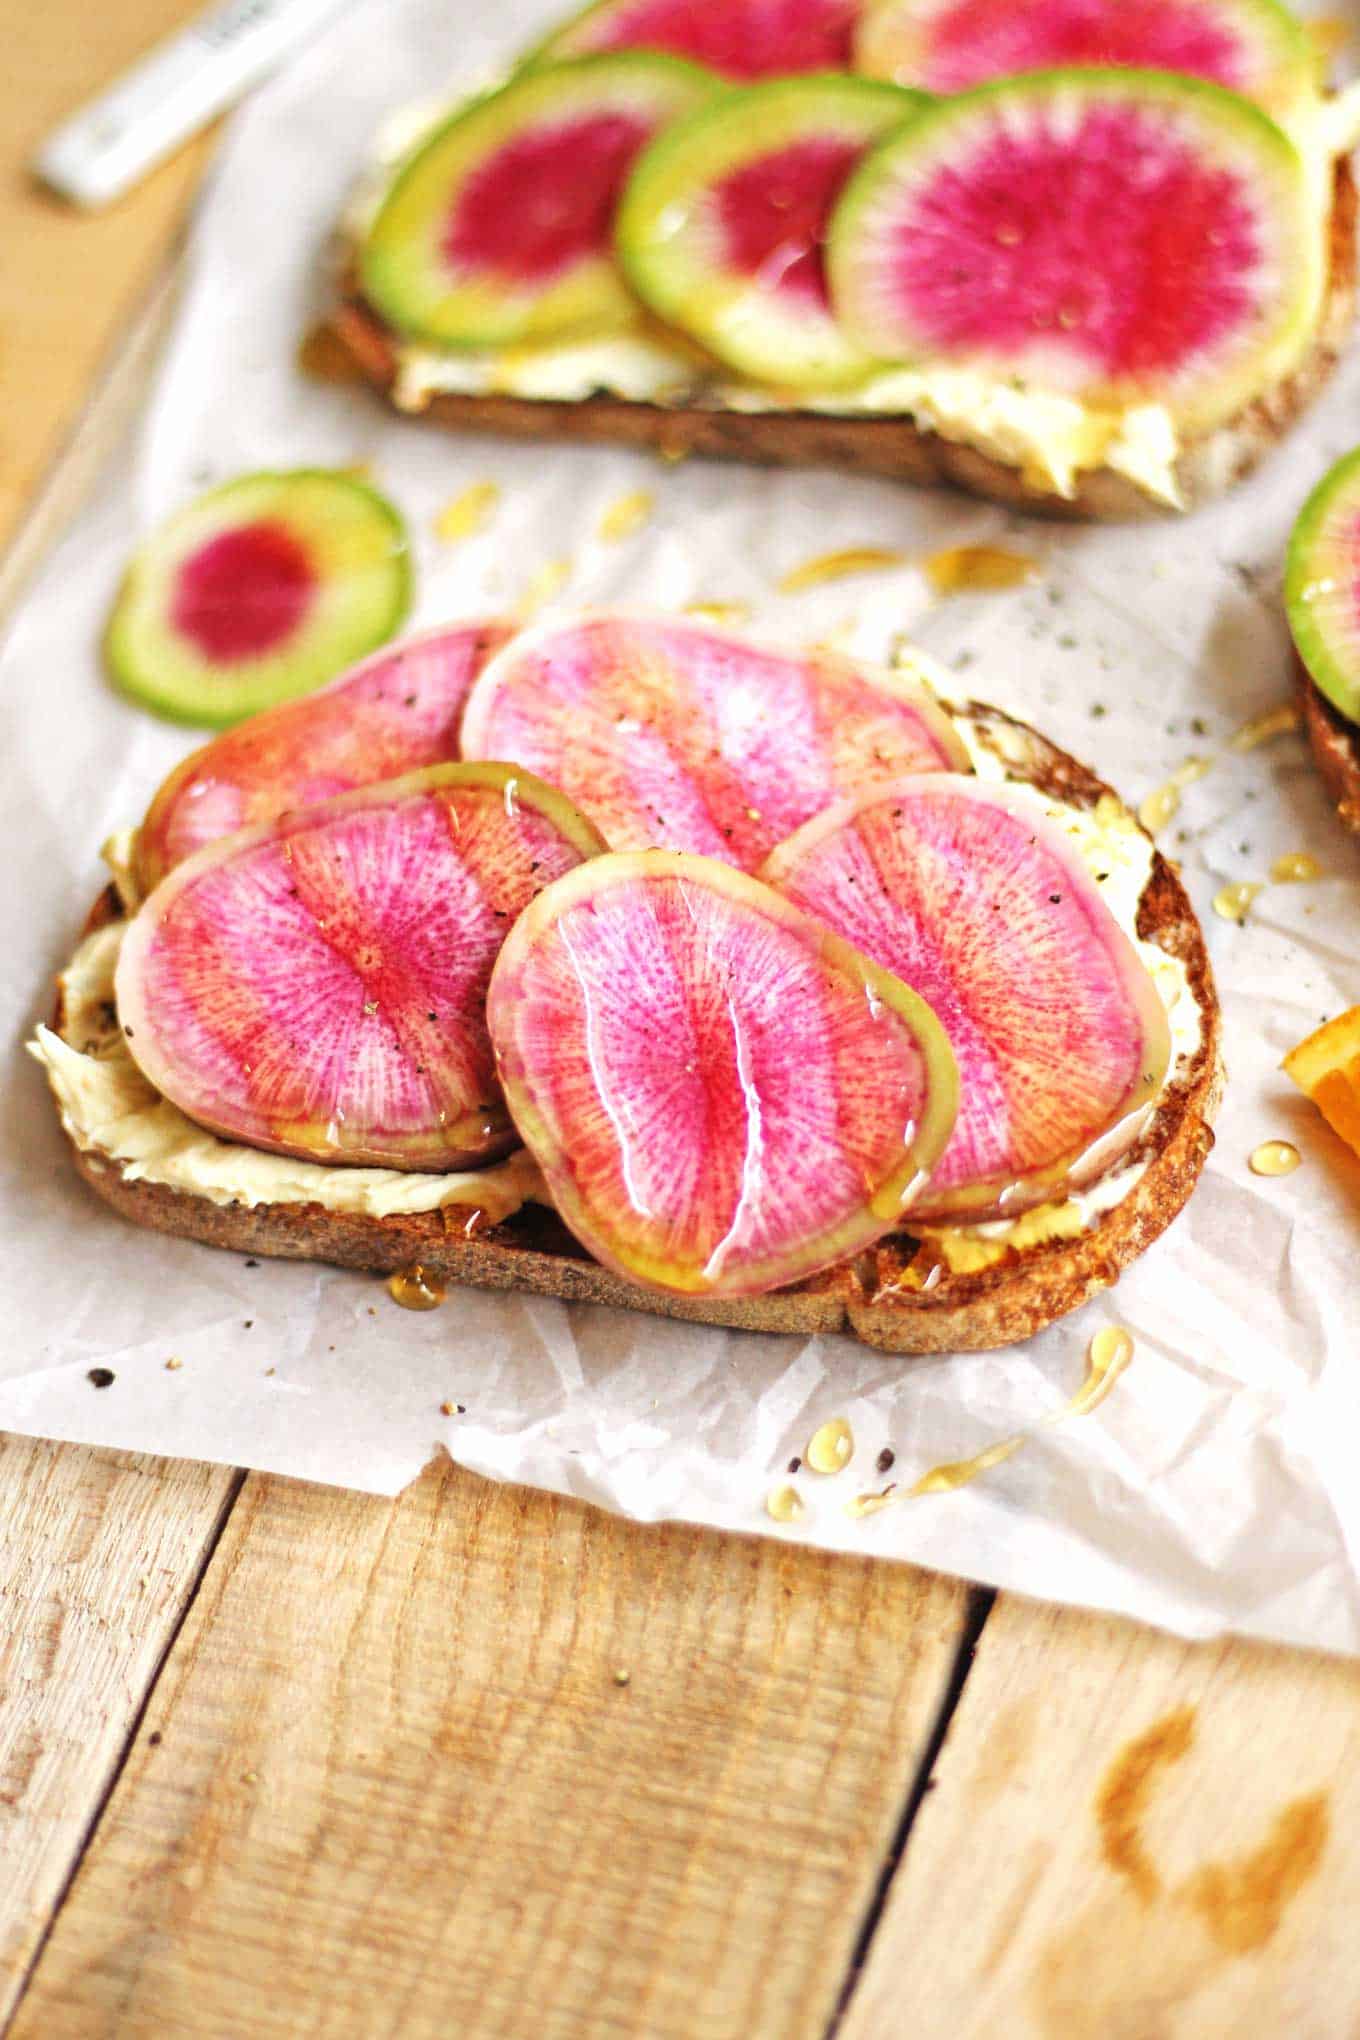 The perfect vegetarian farmers market lunch in only 10 minutes! Bright and springy watermelon radish toast with orange mascarpone and honey recipe. Peppery radishes, mascarpone whipped with orange zest, and sweet honey. // Rhubarbarians